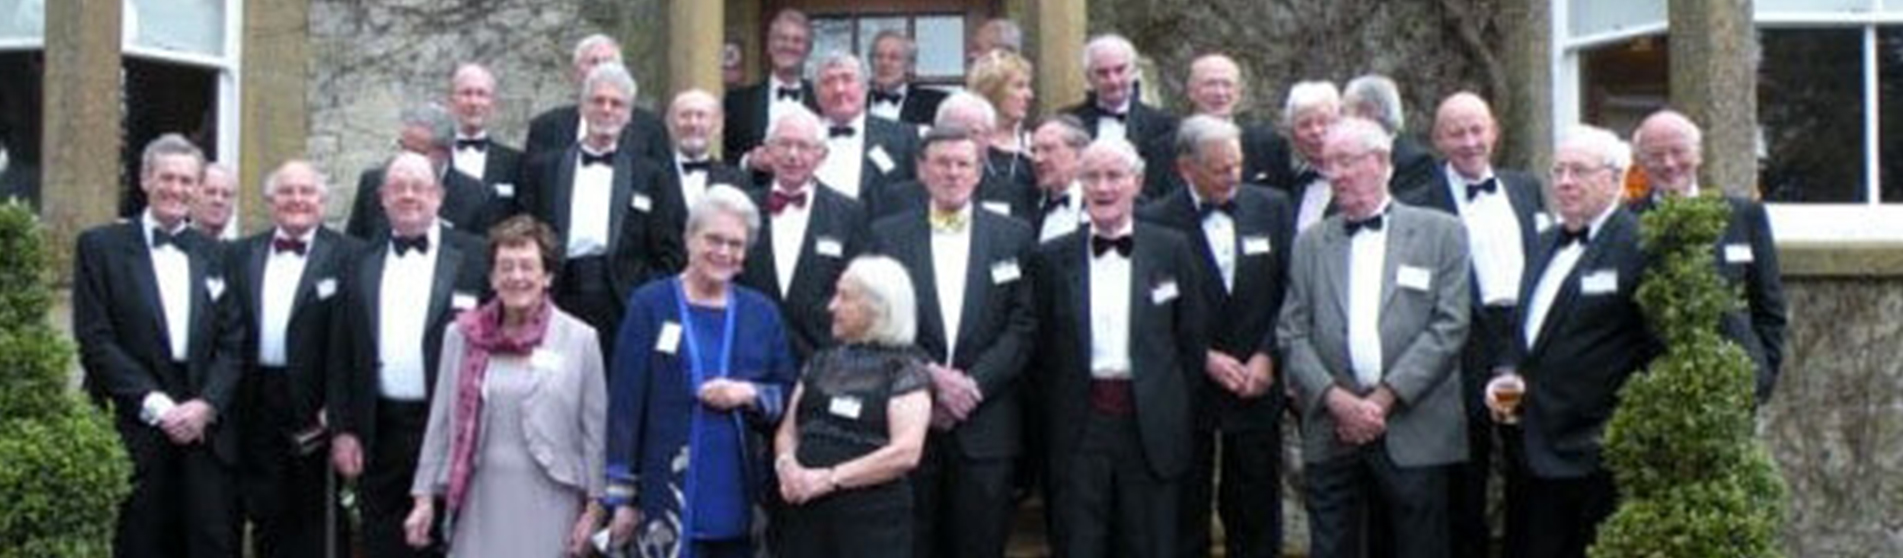 St. Thomas' graduates reunite in 2012 for 45 year reunion (resized)